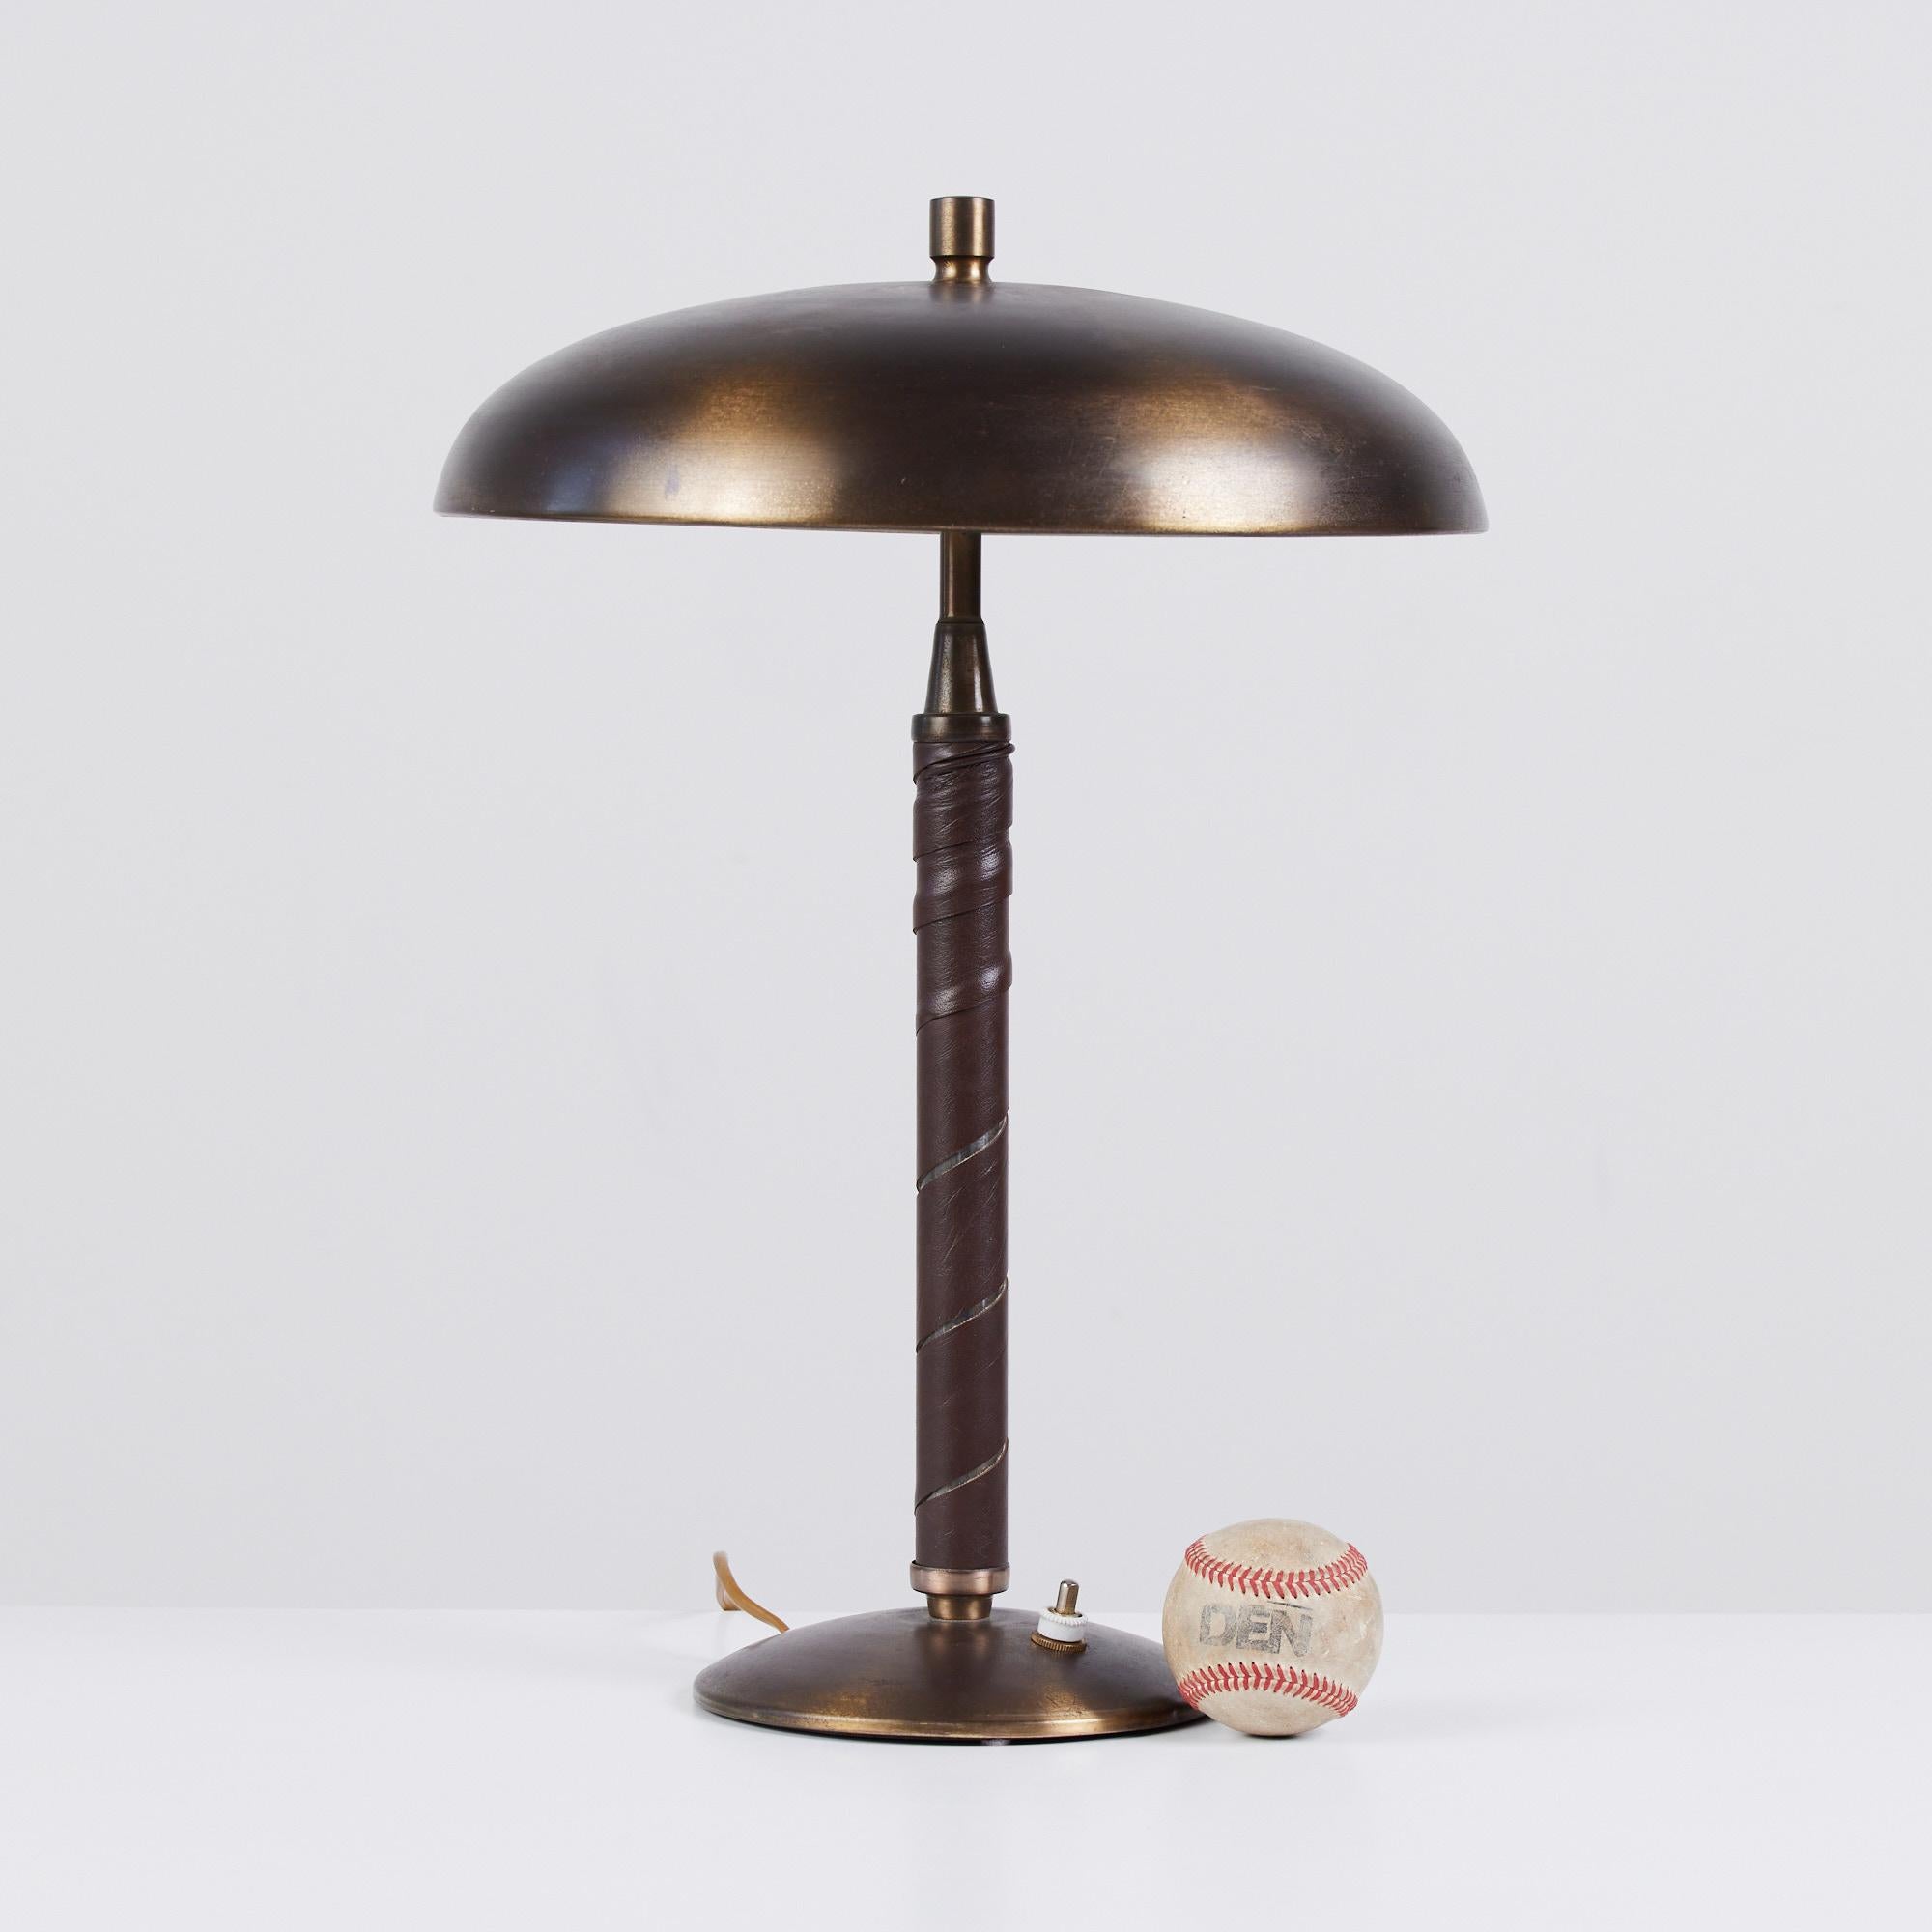 Table lamp by Einar Bäckström c.1950s, Sweden. The lamp features an aged brass stem wrapped in a chocolate brown leather. The brass dome shade is patinated to perfection housing two light bulbs. The round base has a petite on/off switch.

Marked